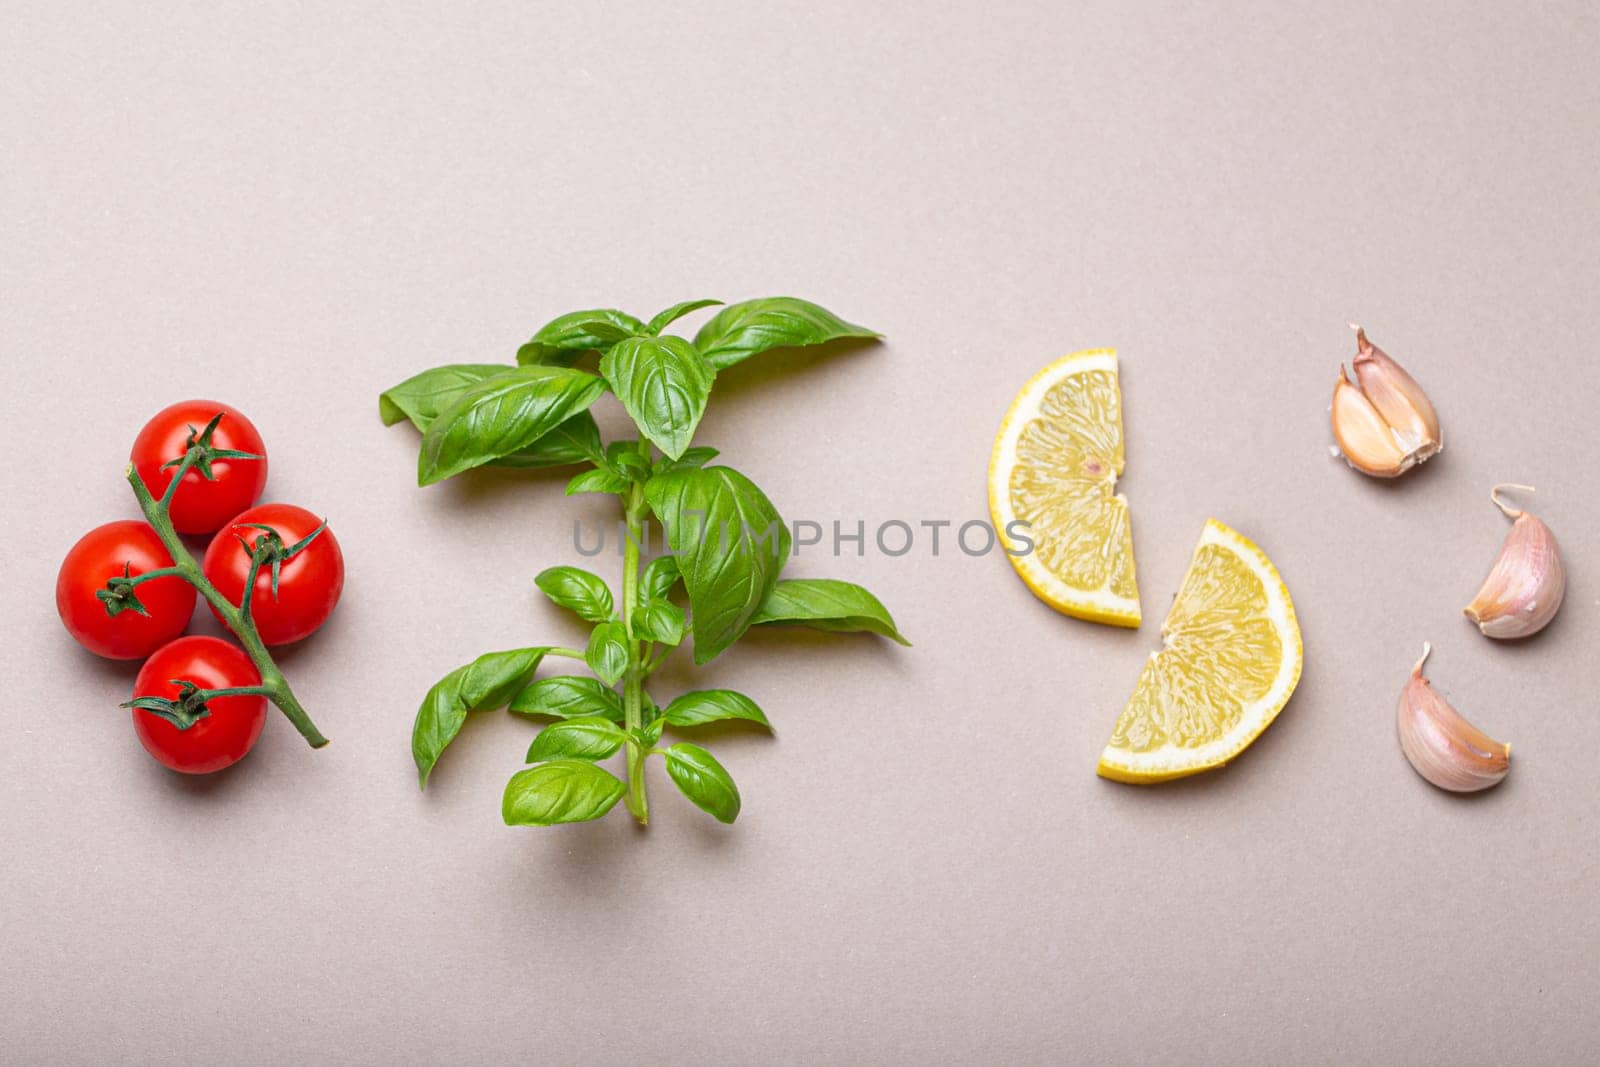 Composition with healthy food ingredients: branch of fresh cherry tomatoes, basil branch, garlic cloves, lemon wedges on minimalistic grey clean background, overhead shot by its_al_dente